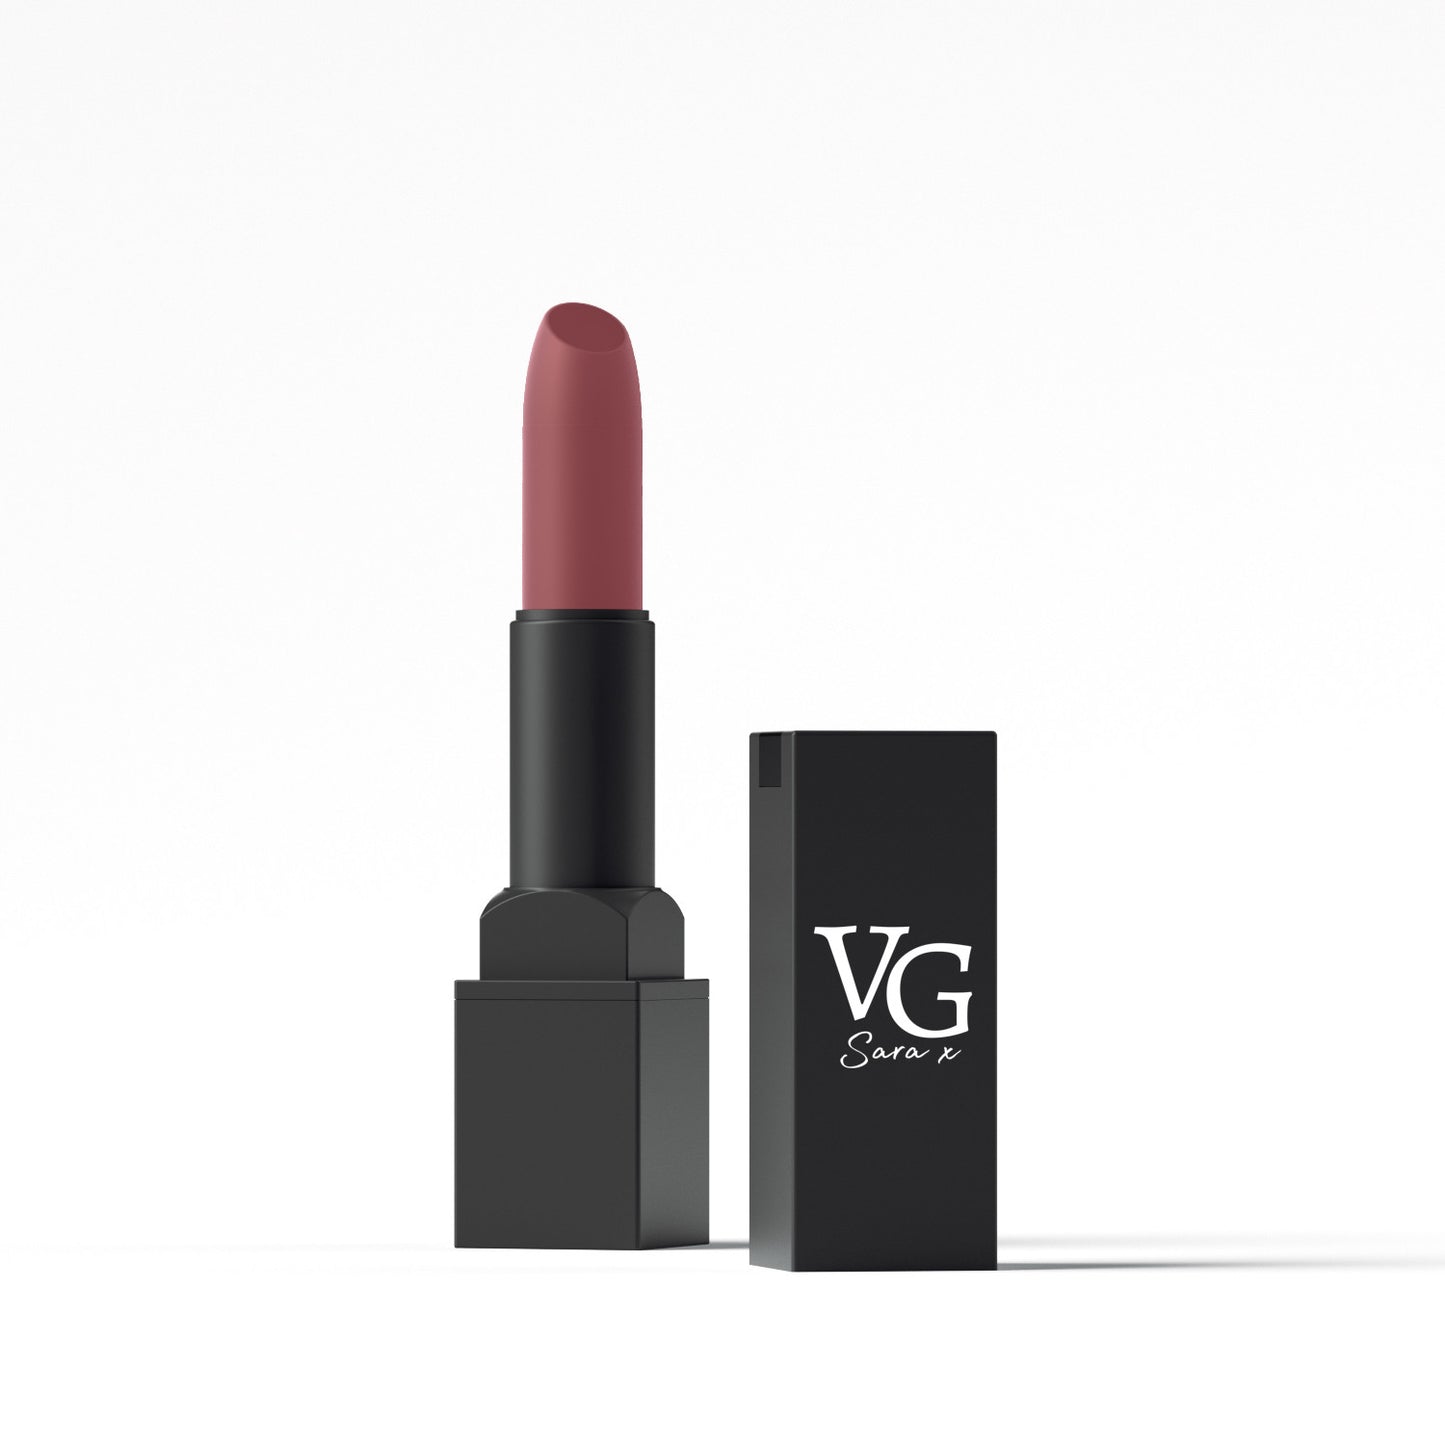 Detailed view of VG logo on Naturally Long-Lasting Lipstick